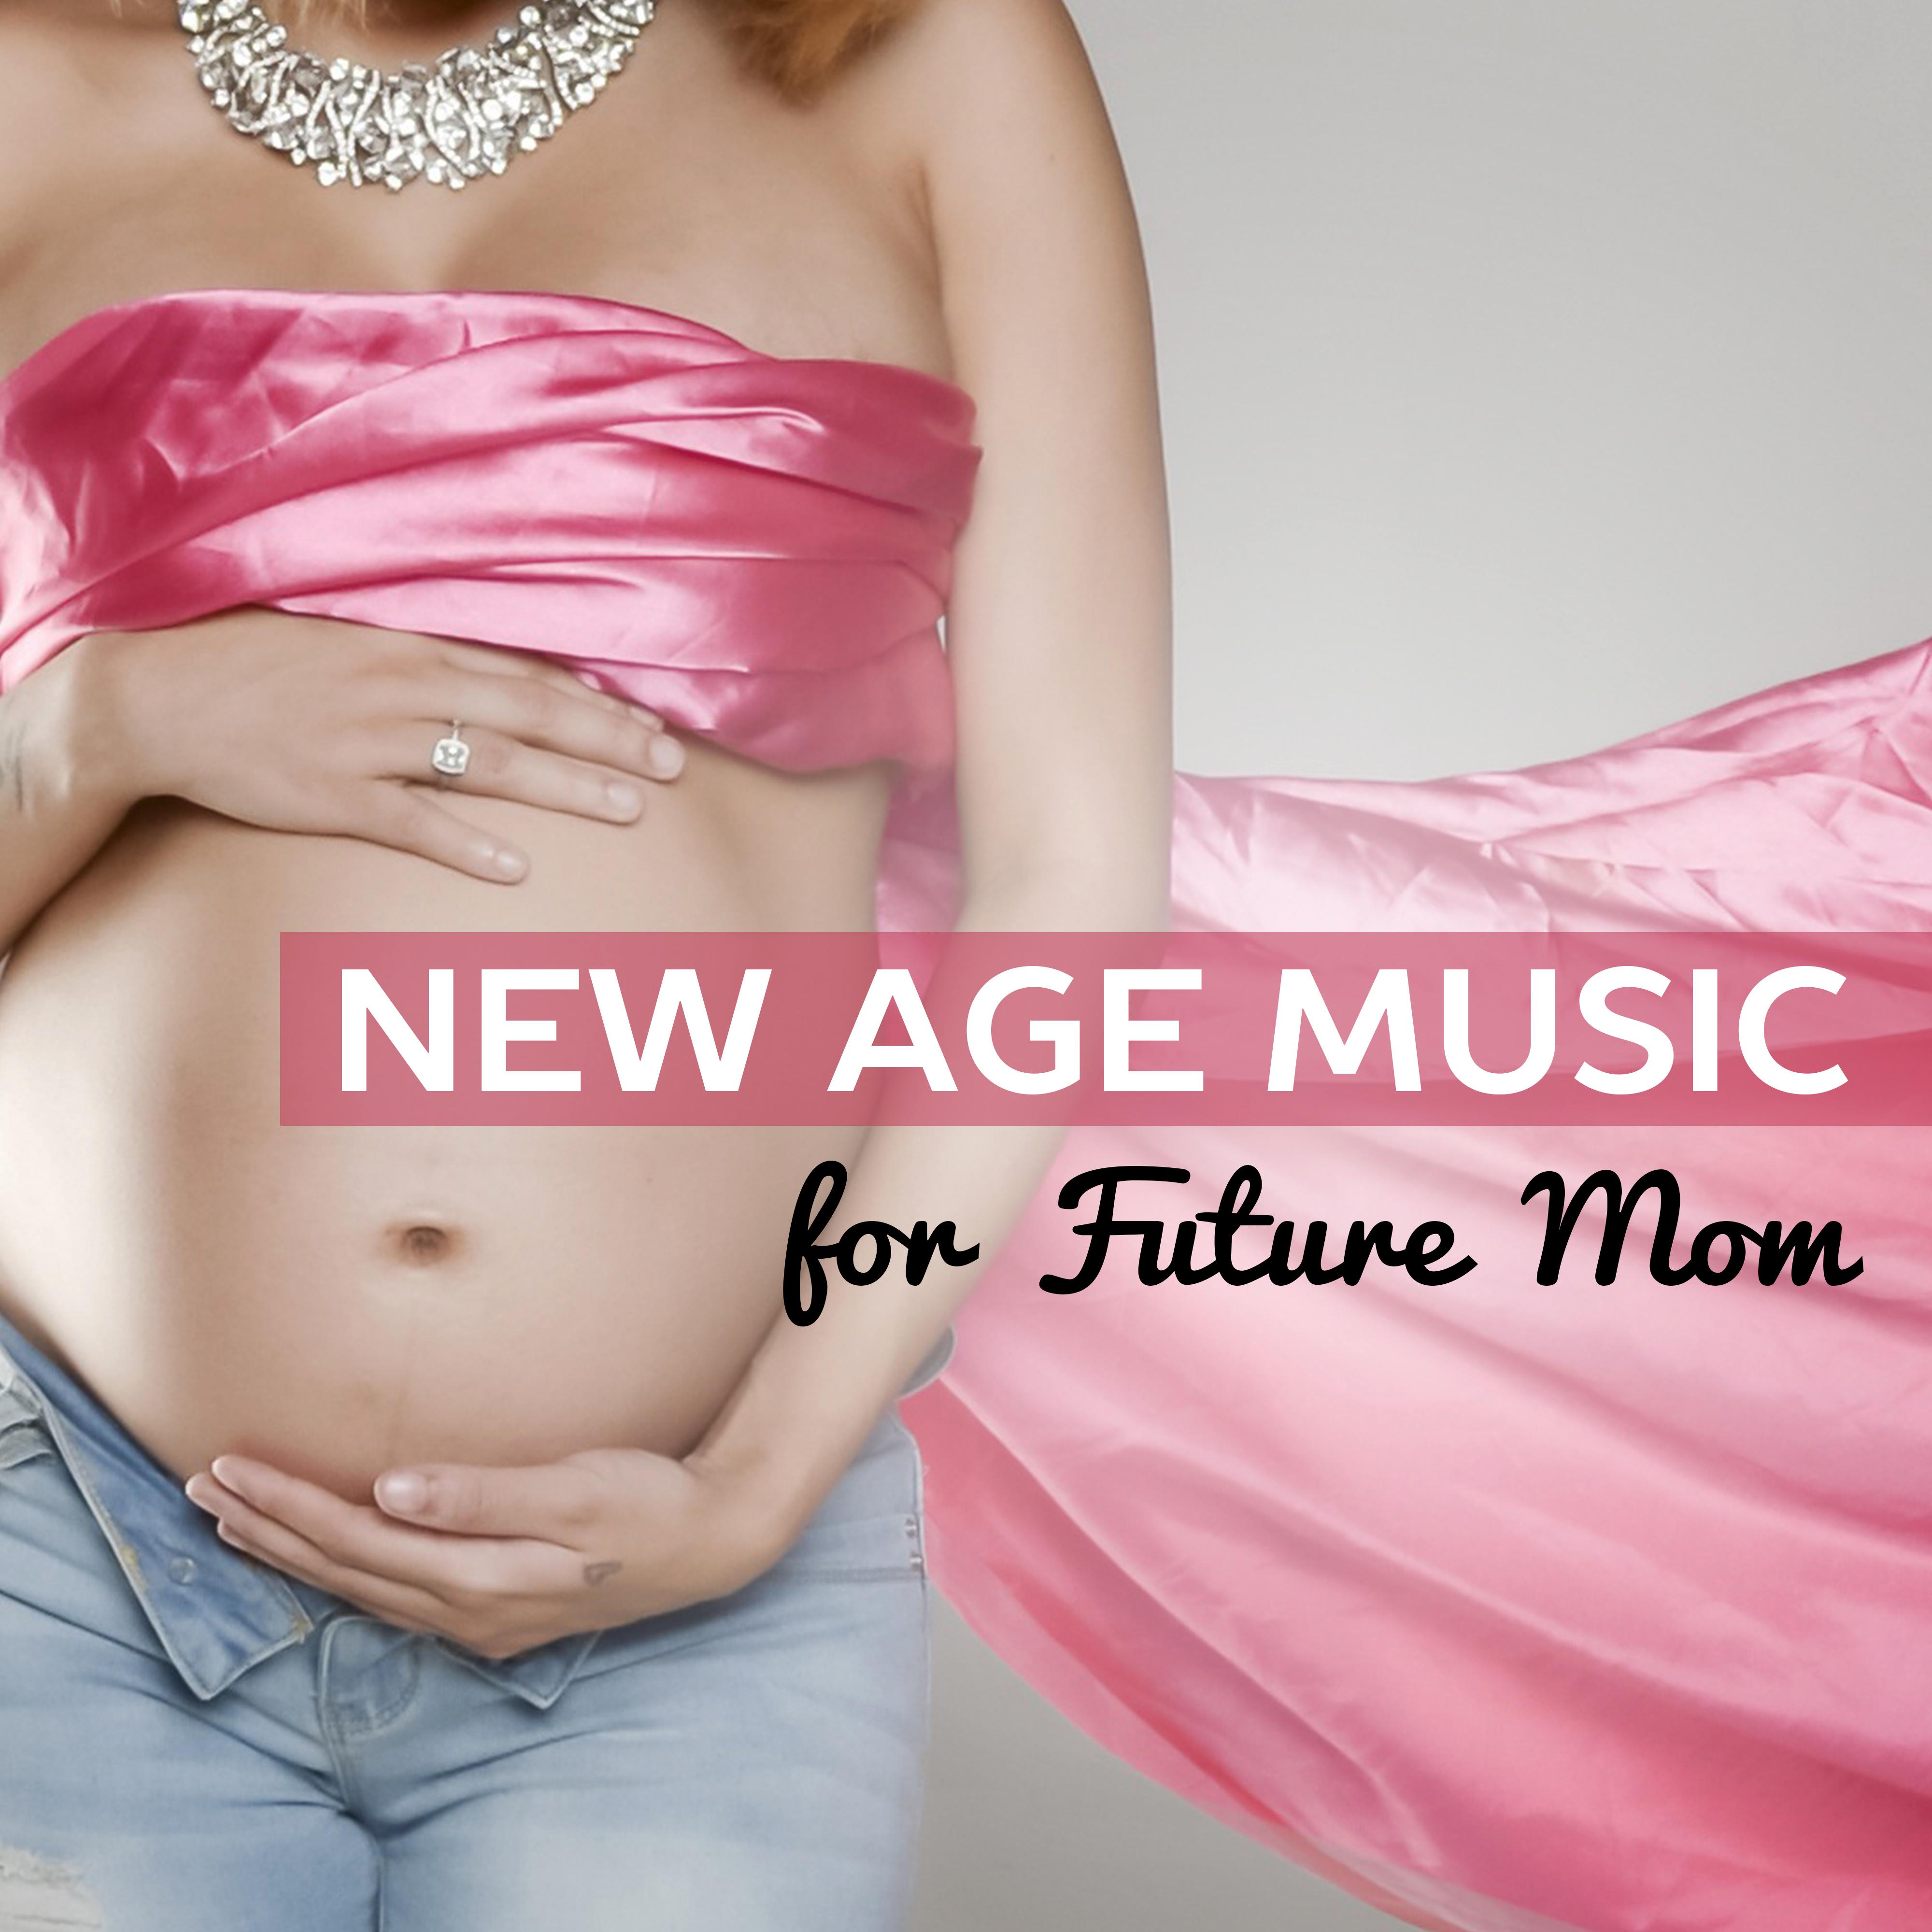 New Age Music for Future Mom  Pregnant Woman, Soothing Sounds to Calm Down, Pregnancy Music, Healing Nature